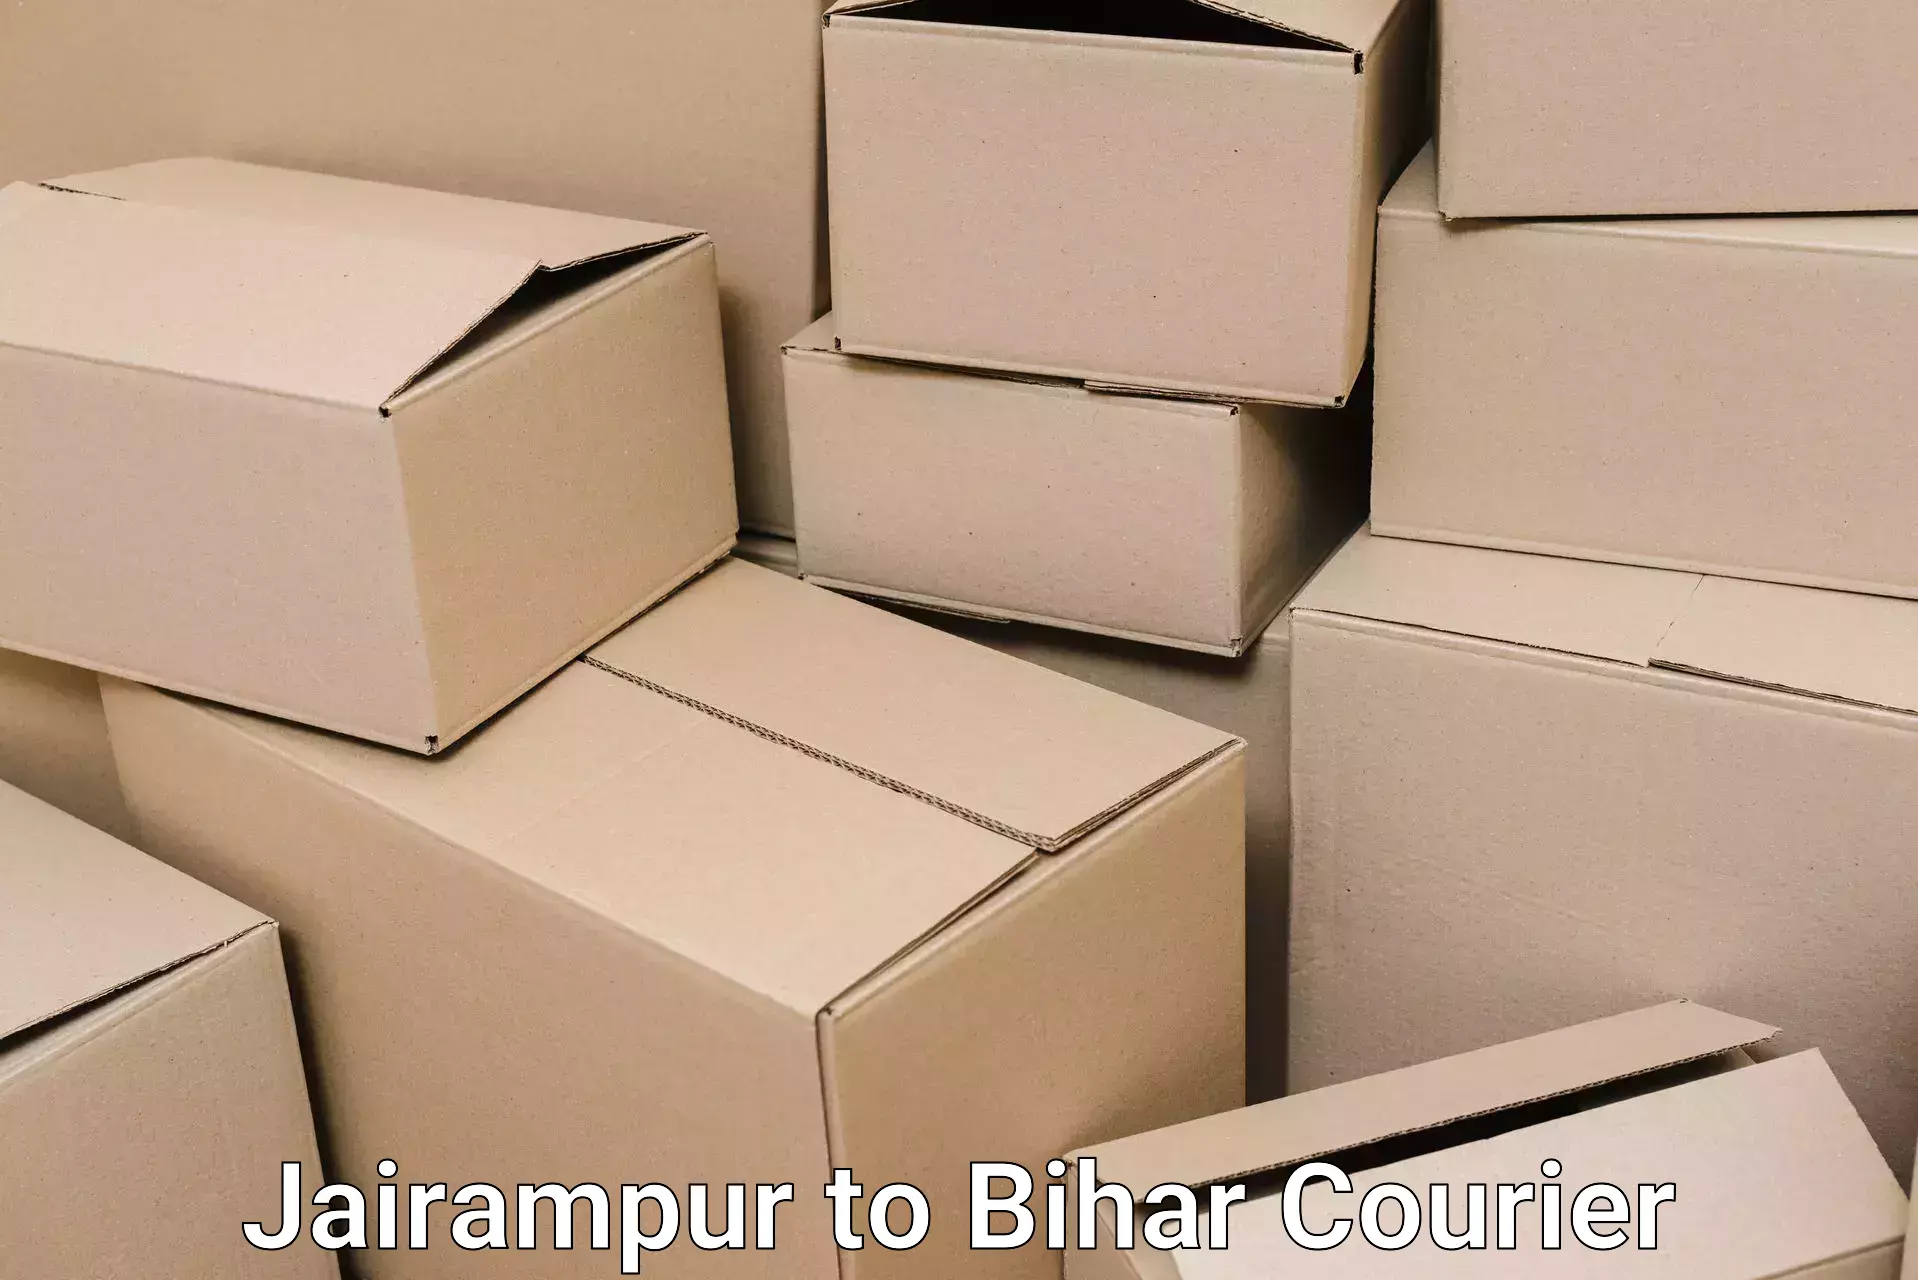 Reliable relocation services Jairampur to Rajpur